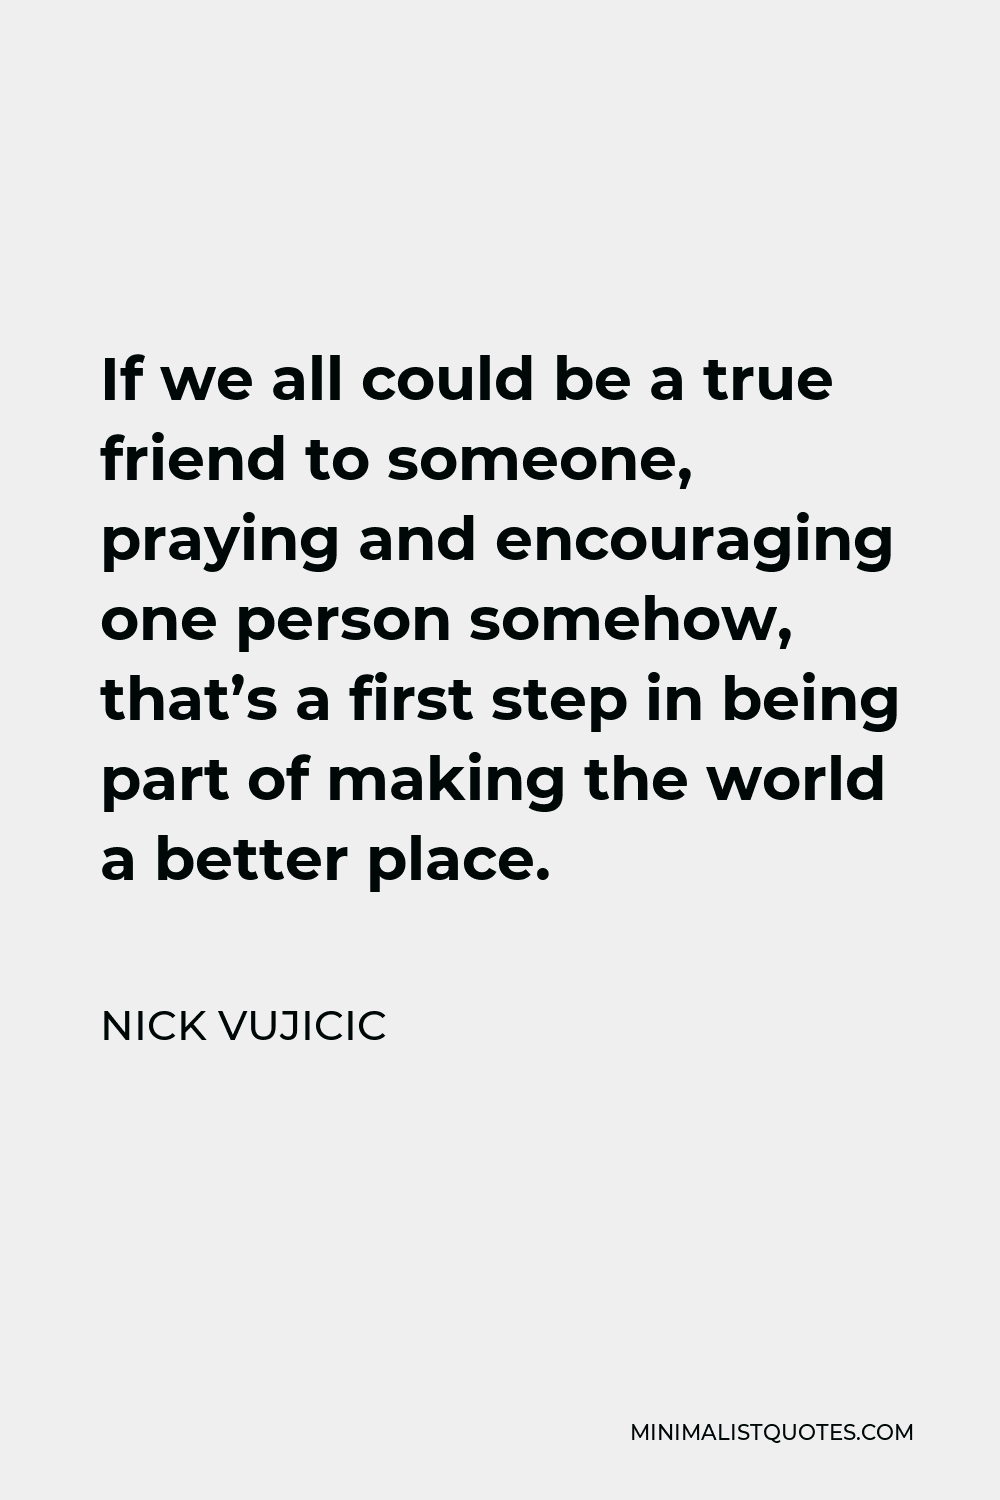 Nick Vujicic Quote - If we all could be a true friend to someone, praying and encouraging one person somehow, that’s a first step in being part of making the world a better place.